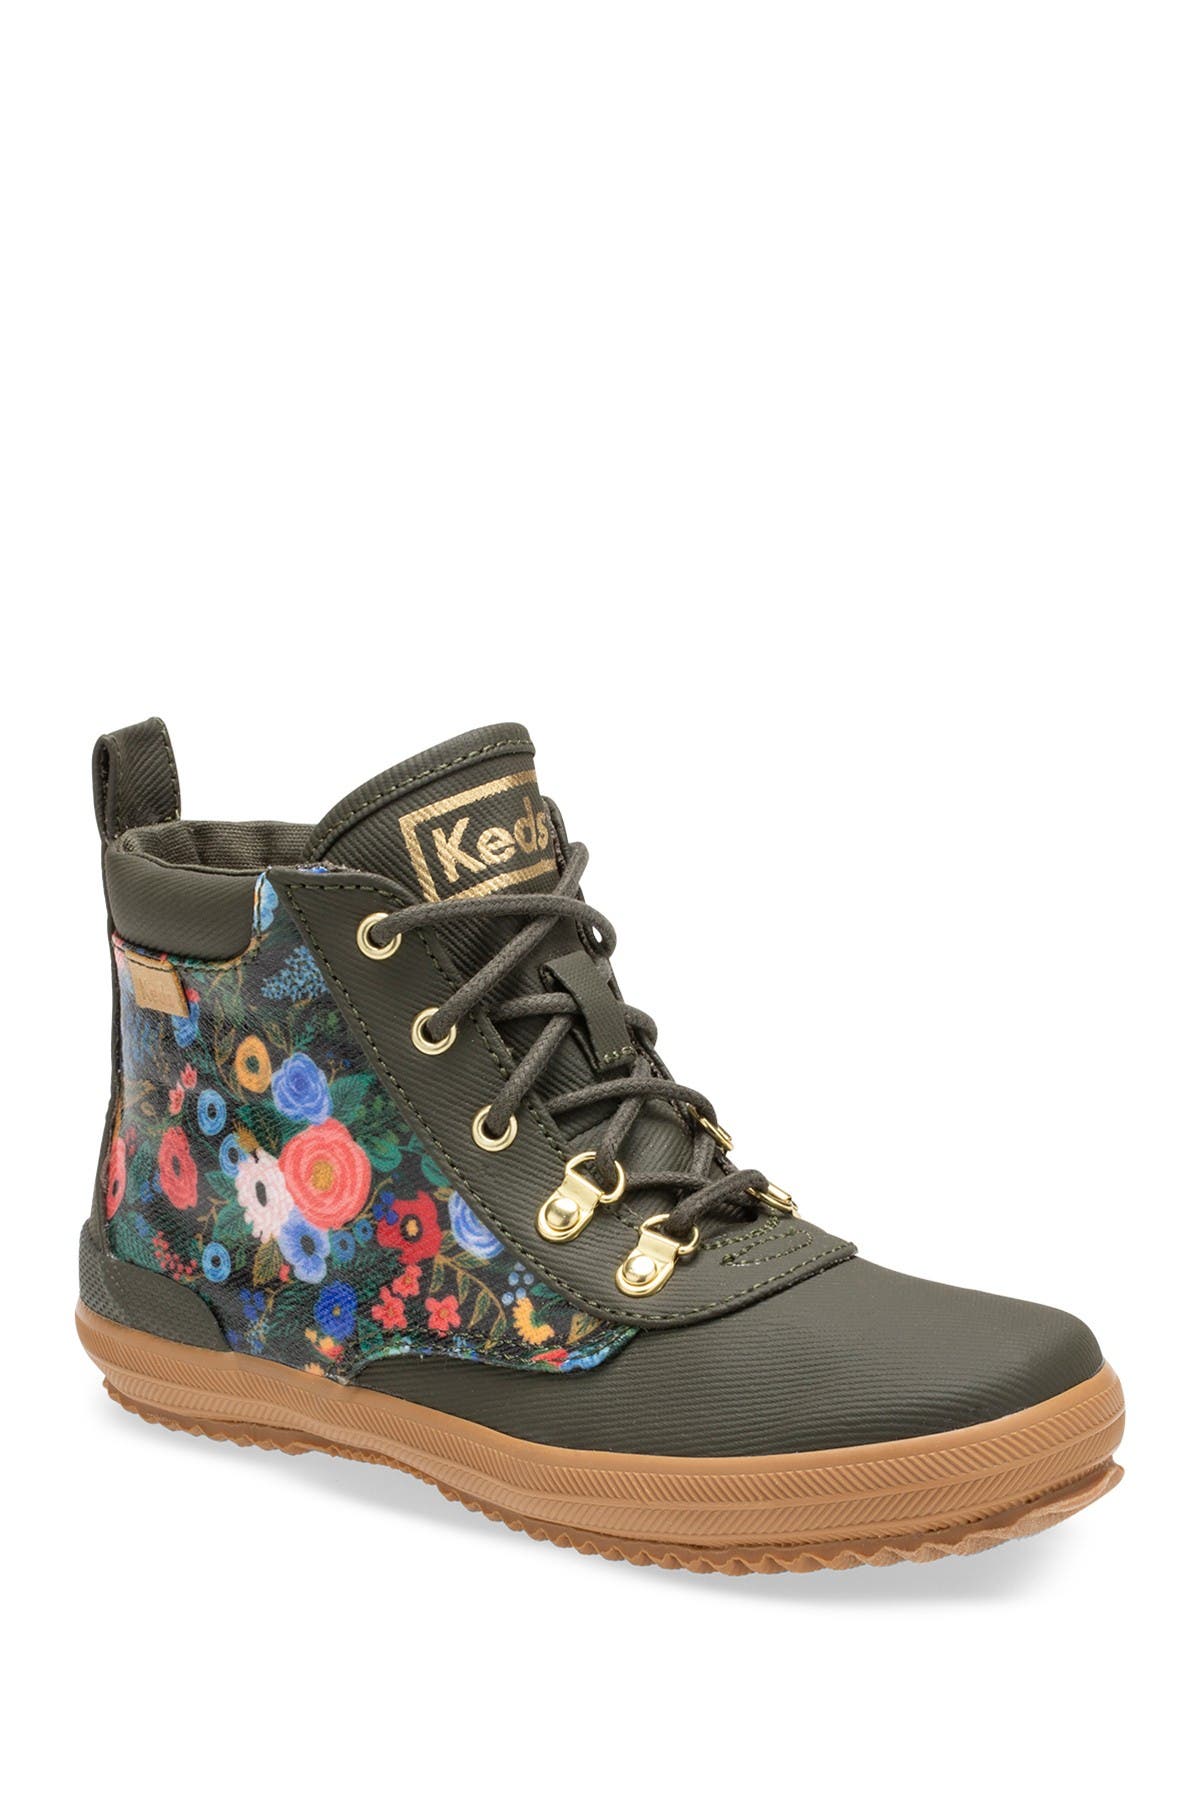 Keds | Scout Printed Boot | Nordstrom Rack